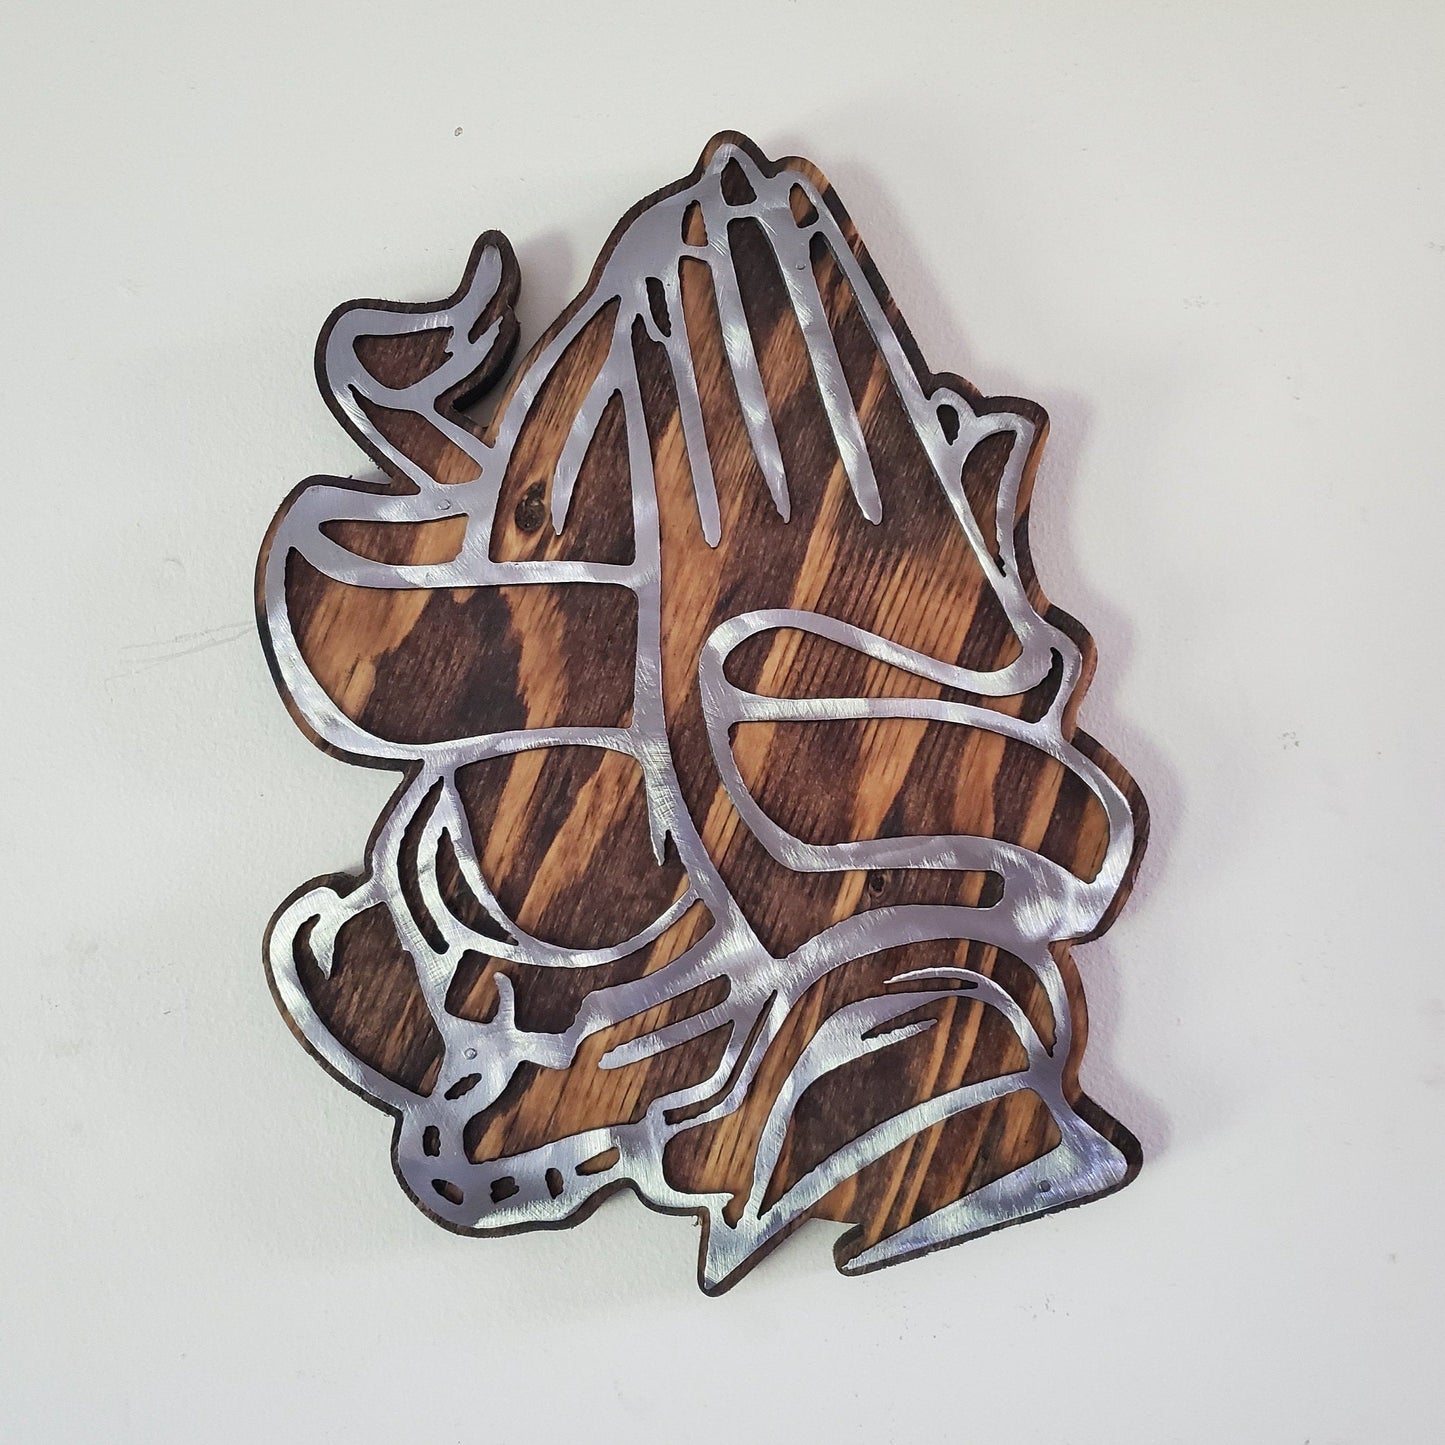 The Praying Hands showing of Faith metal art on wood wall décor is the perfect way to show your appreciation for the spiritual side in your life. This unique piece of art is finished by hand